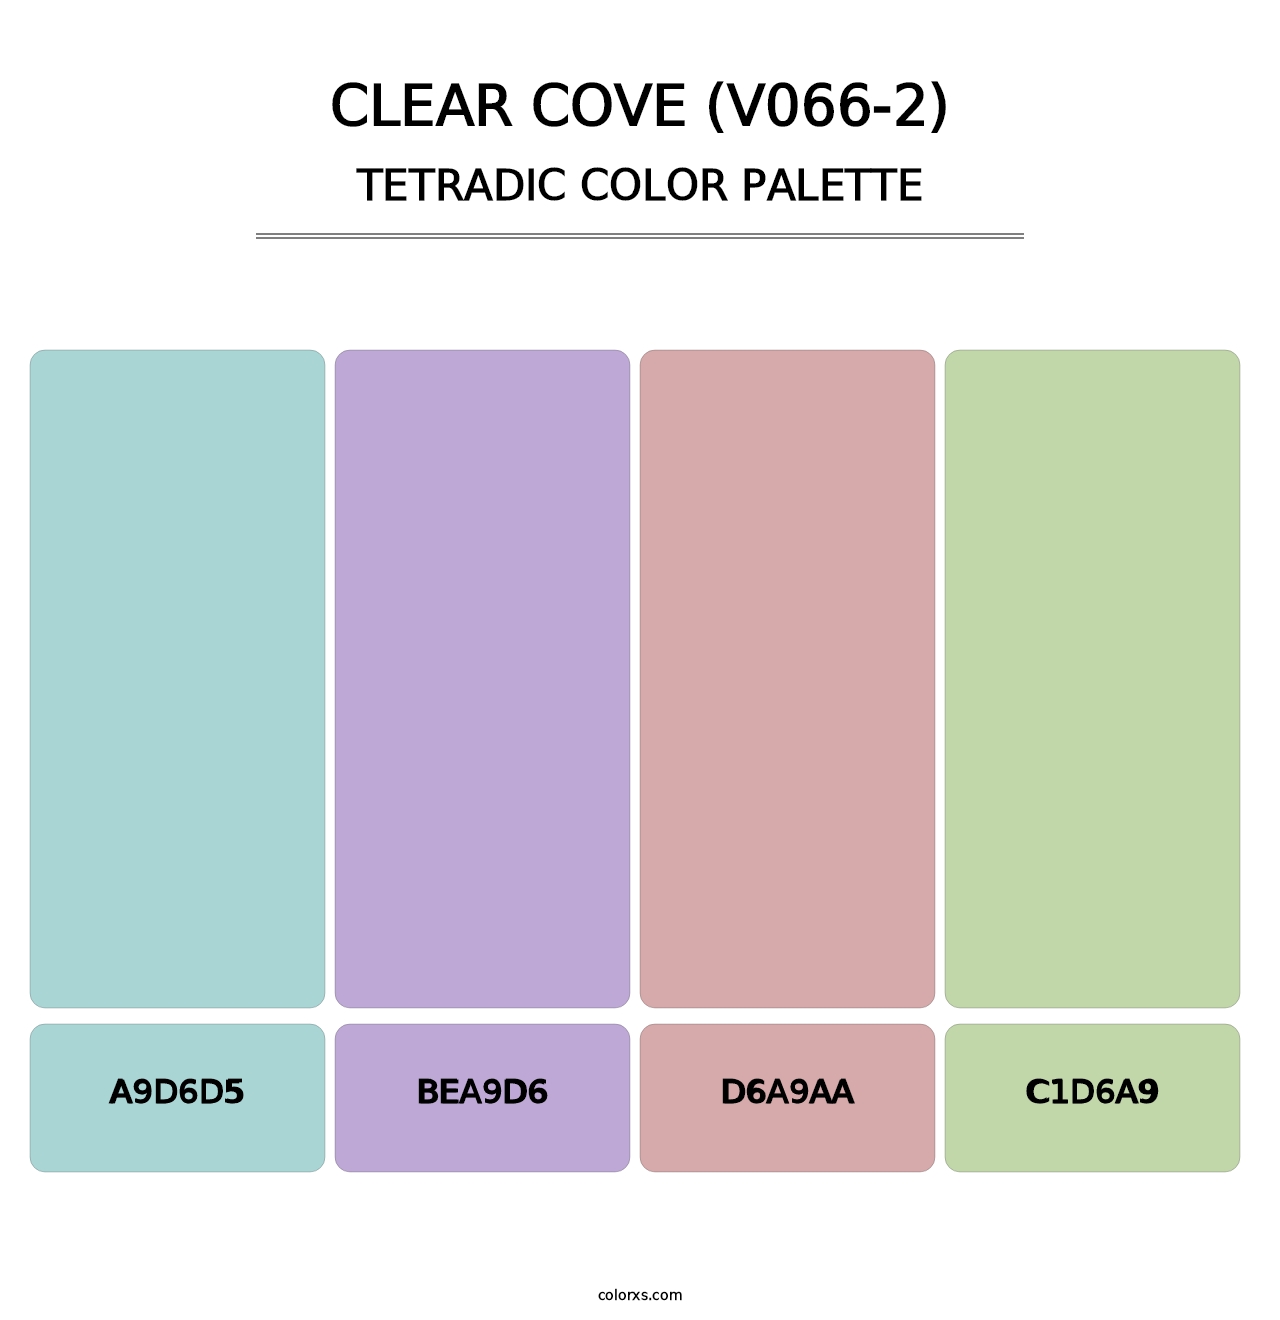 Clear Cove (V066-2) - Tetradic Color Palette